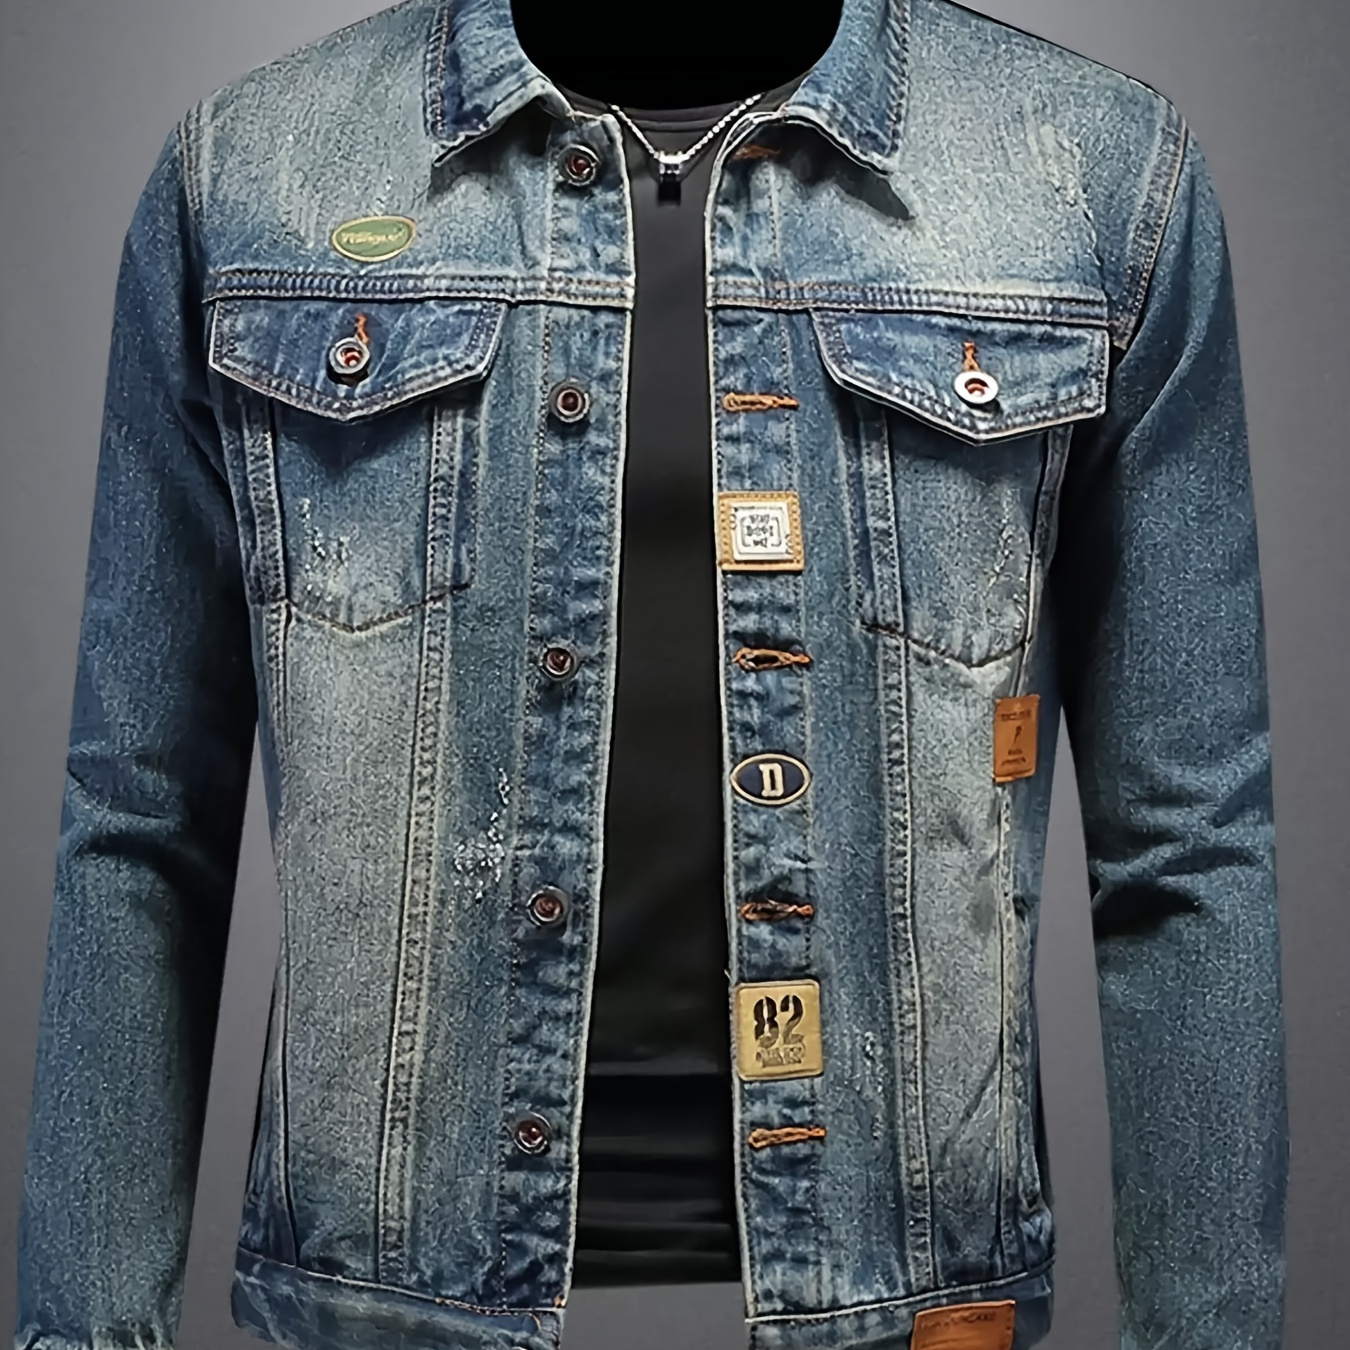 

Men's 82 Print Ripped Denim Jacket With Chest Pockets, Casual Lapel Button Up Cotton Blend Long Sleeve Outwear For Outdoor